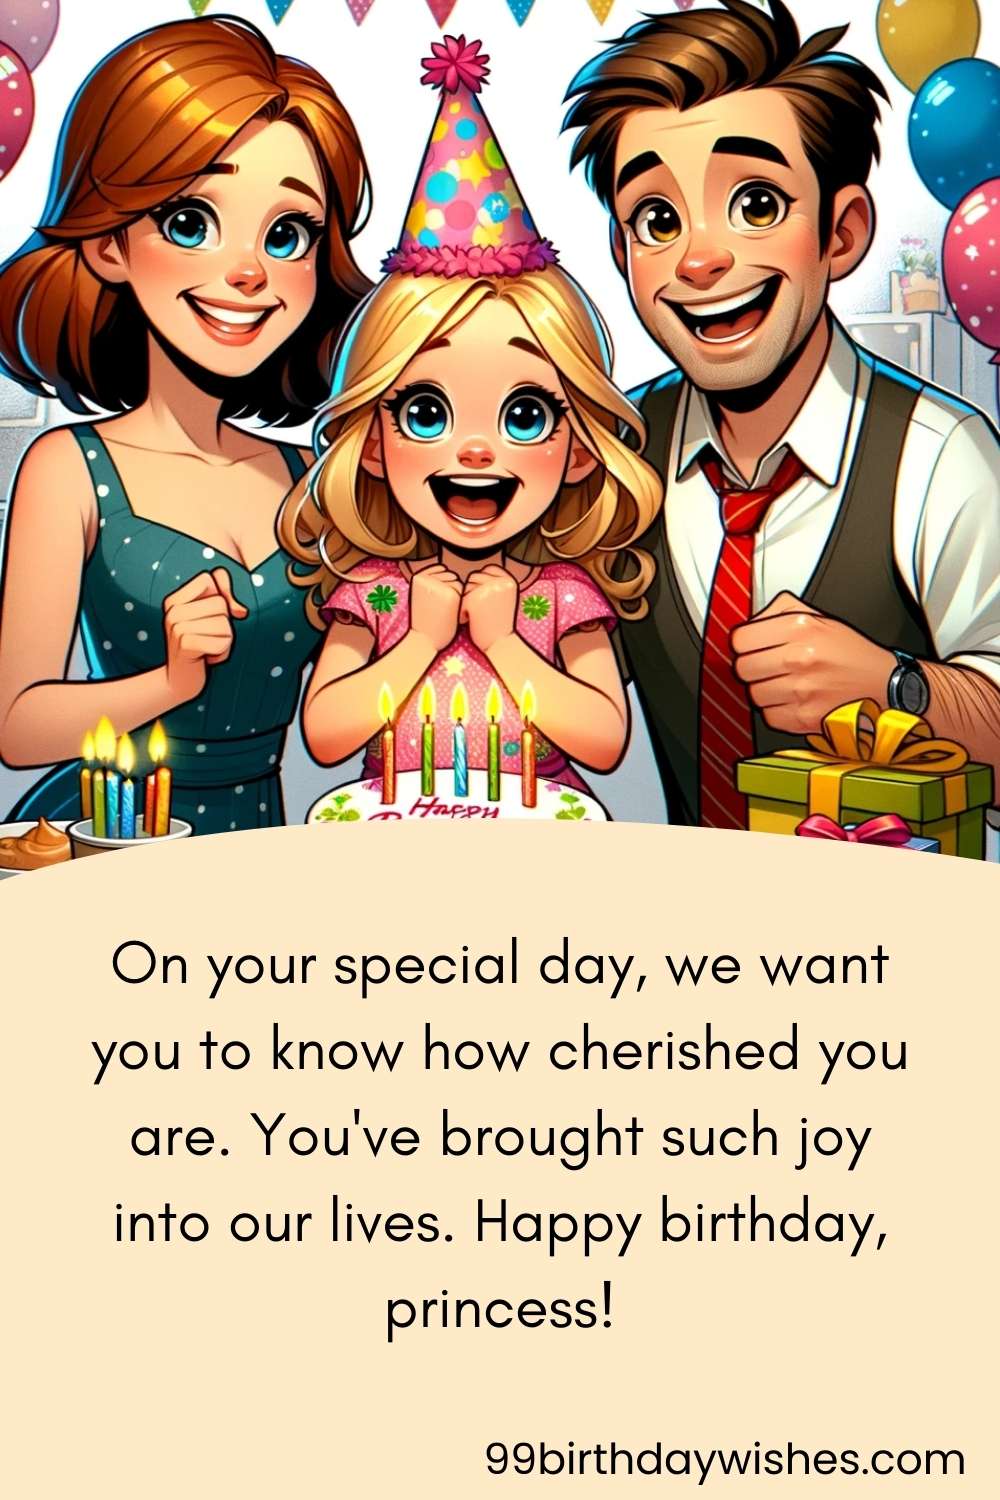 Heartwarming Birthday Wishes For Daughter